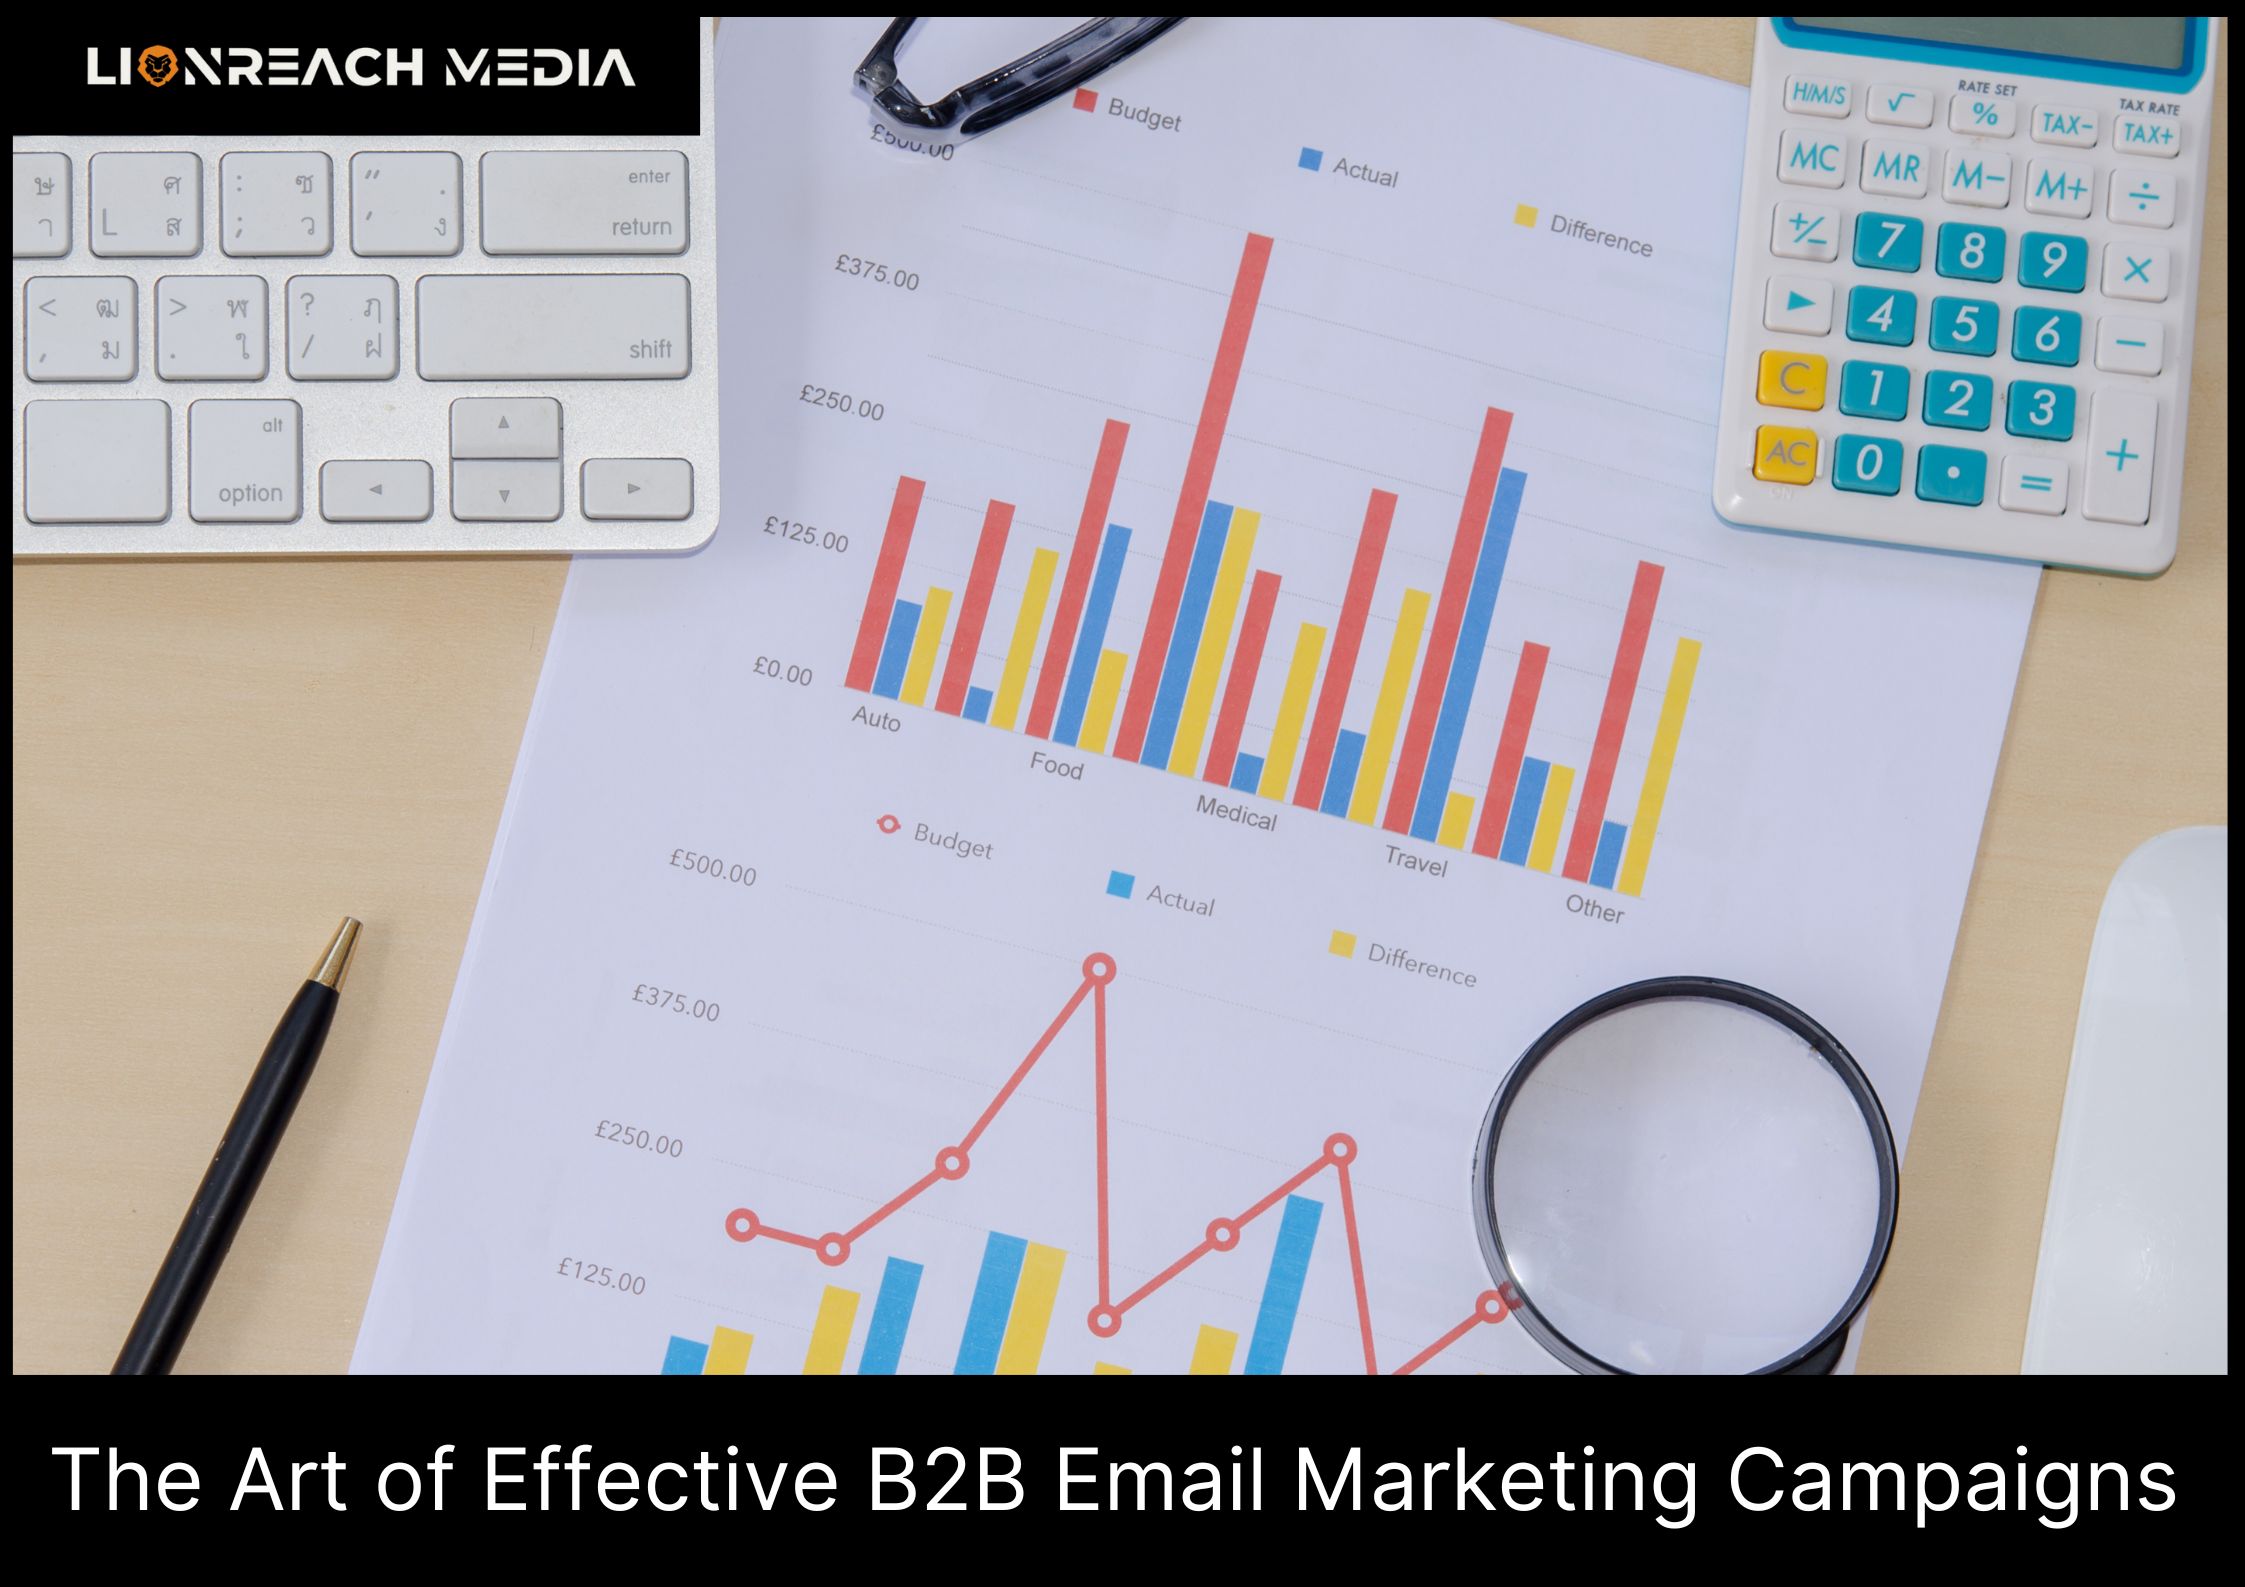 The Art of Effective B2B Email Marketing Campaigns